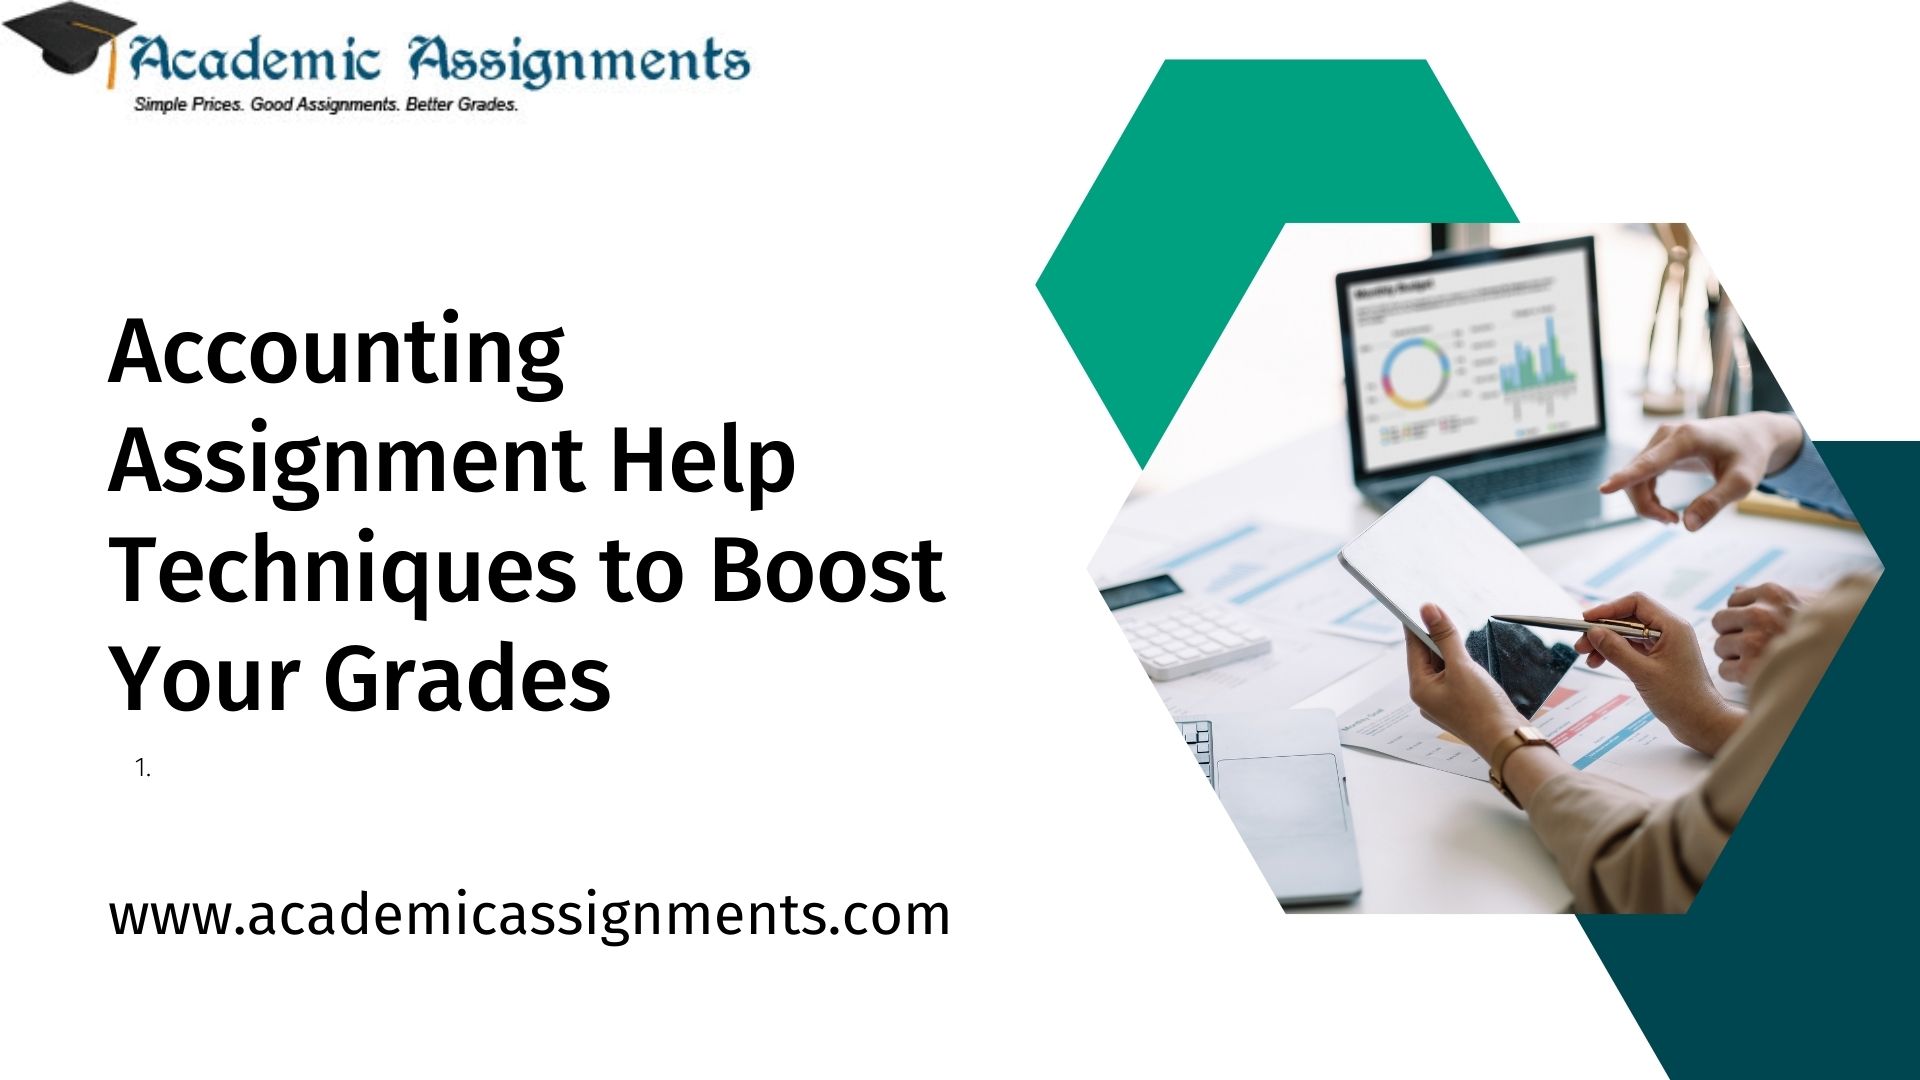 Accounting Assignment Help Techniques to Boost Your Grades